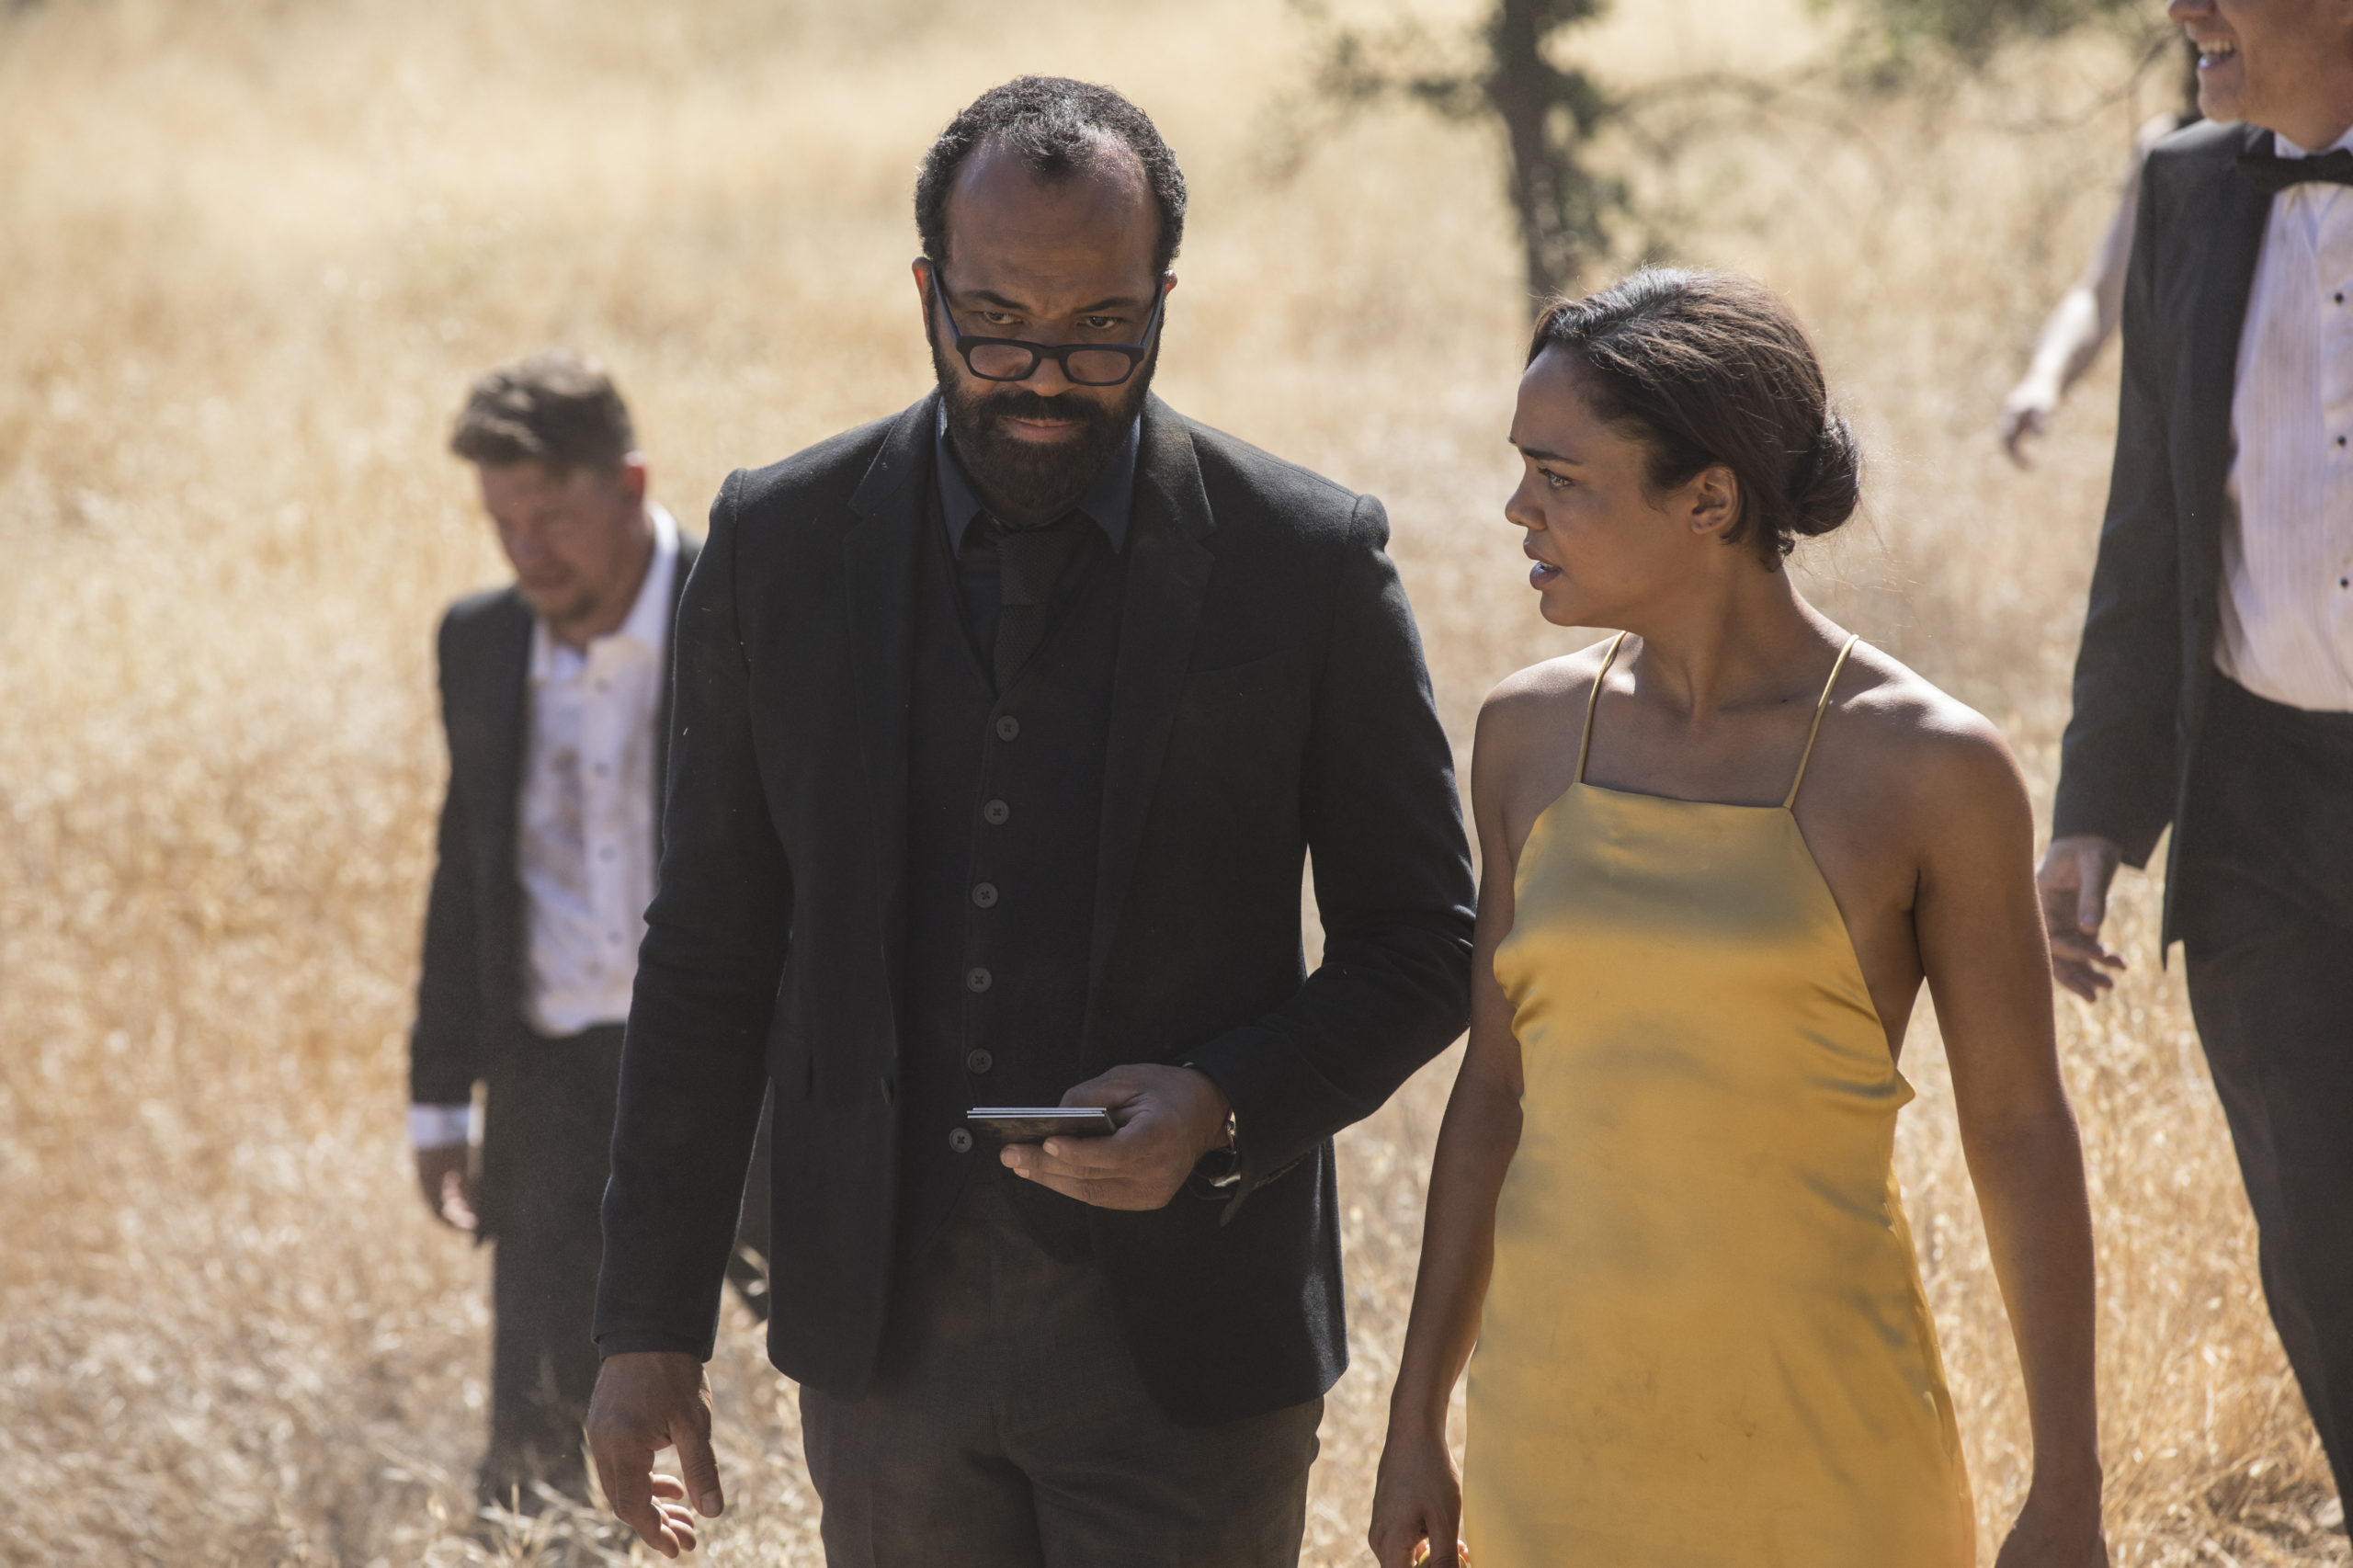 Westworld Returns And Nothing Is As It Seems Except For All The Corpses